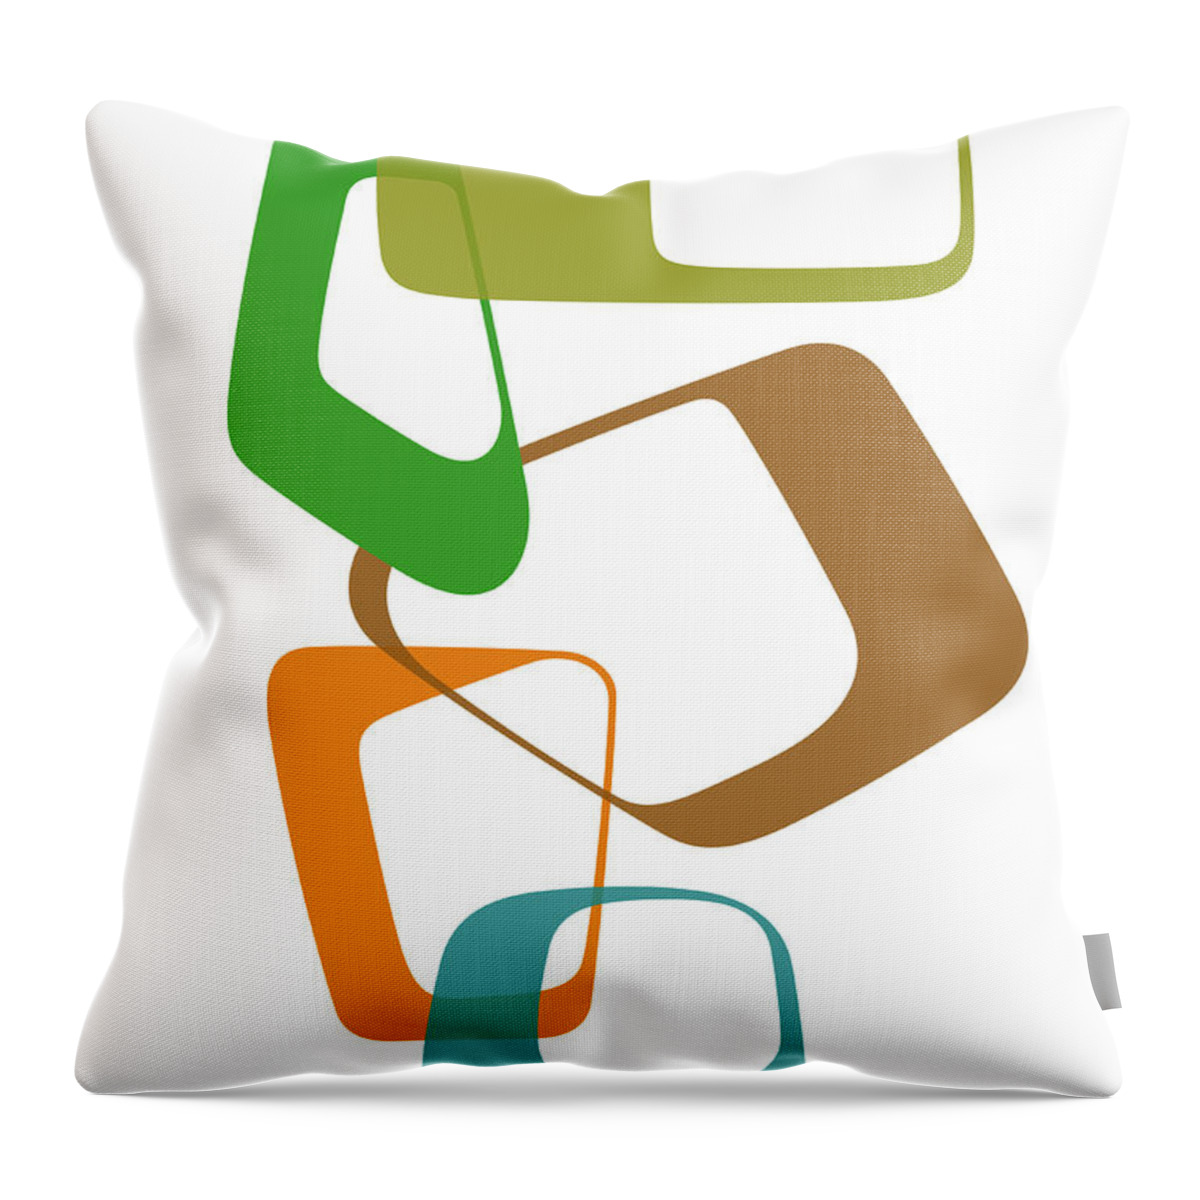 Abstract Throw Pillow featuring the digital art Abstract Rings I by Naxart Studio